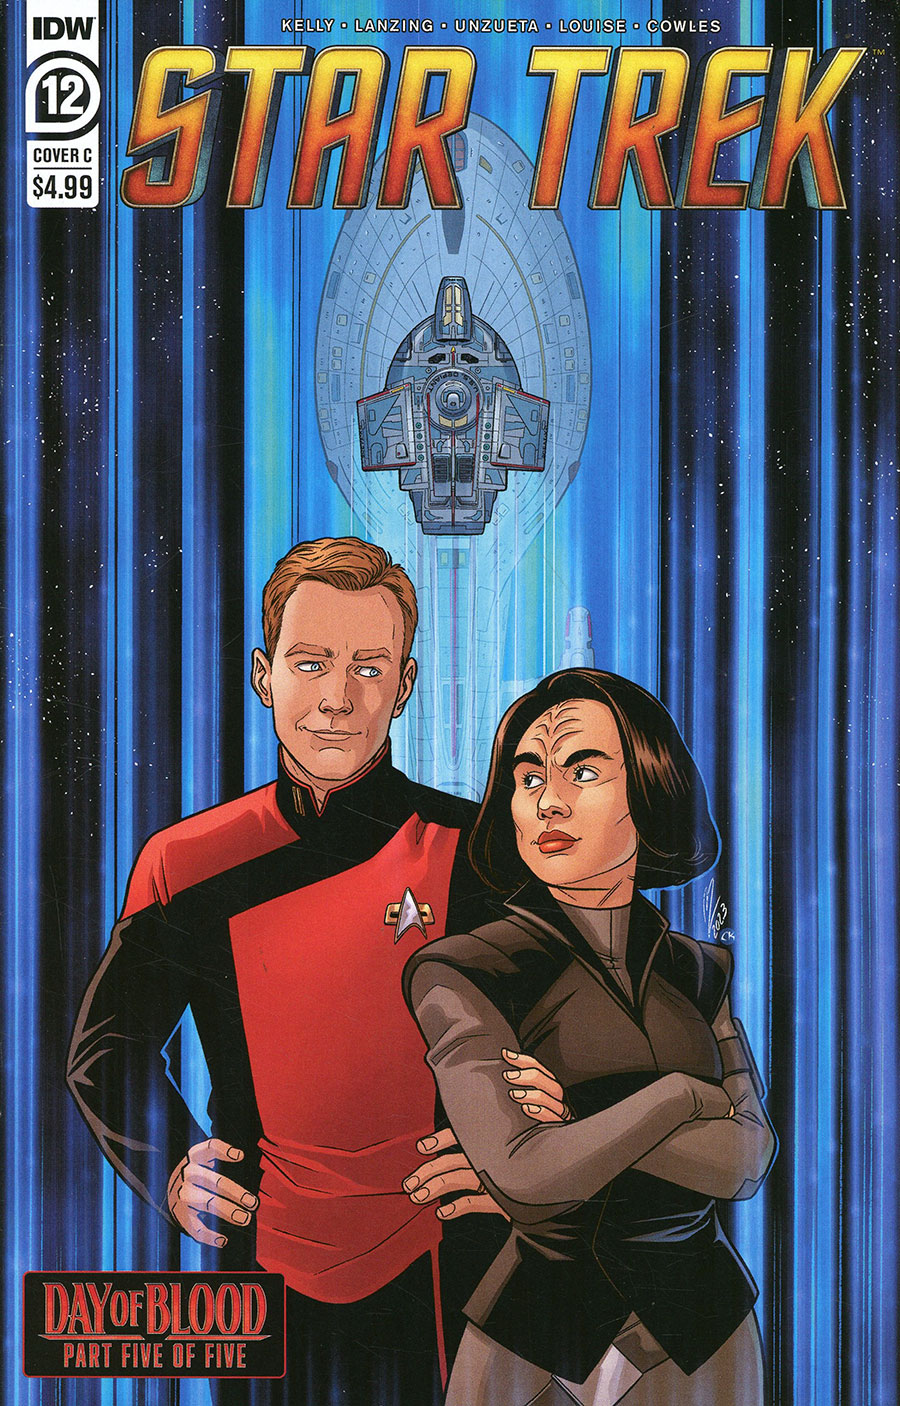 Star Trek (IDW) Vol 2 #12 Cover C Variant Megan Levens Cover (Day Of Blood Part 5)